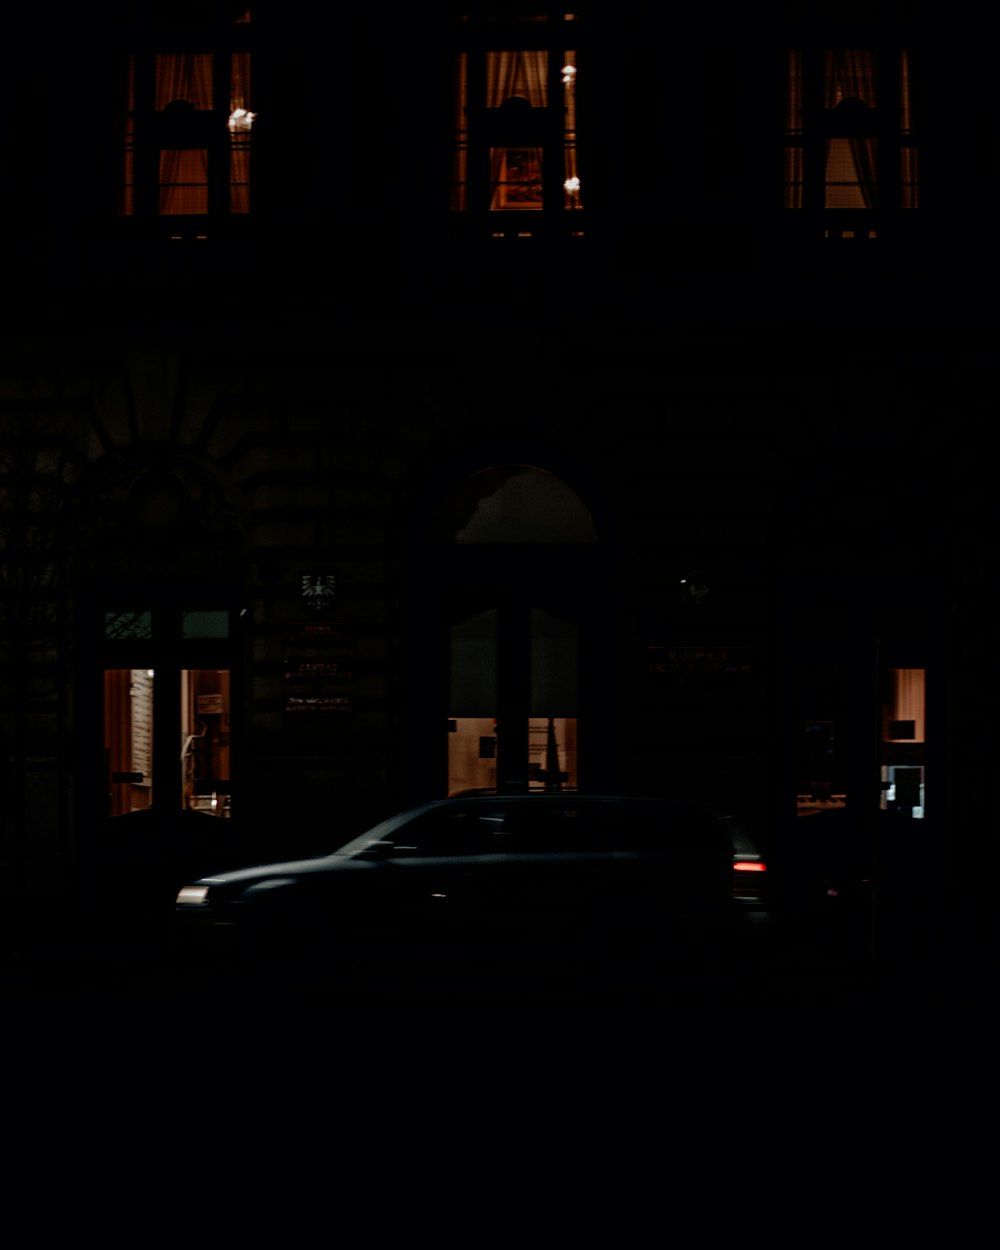 cars parked in front of brown building during night time